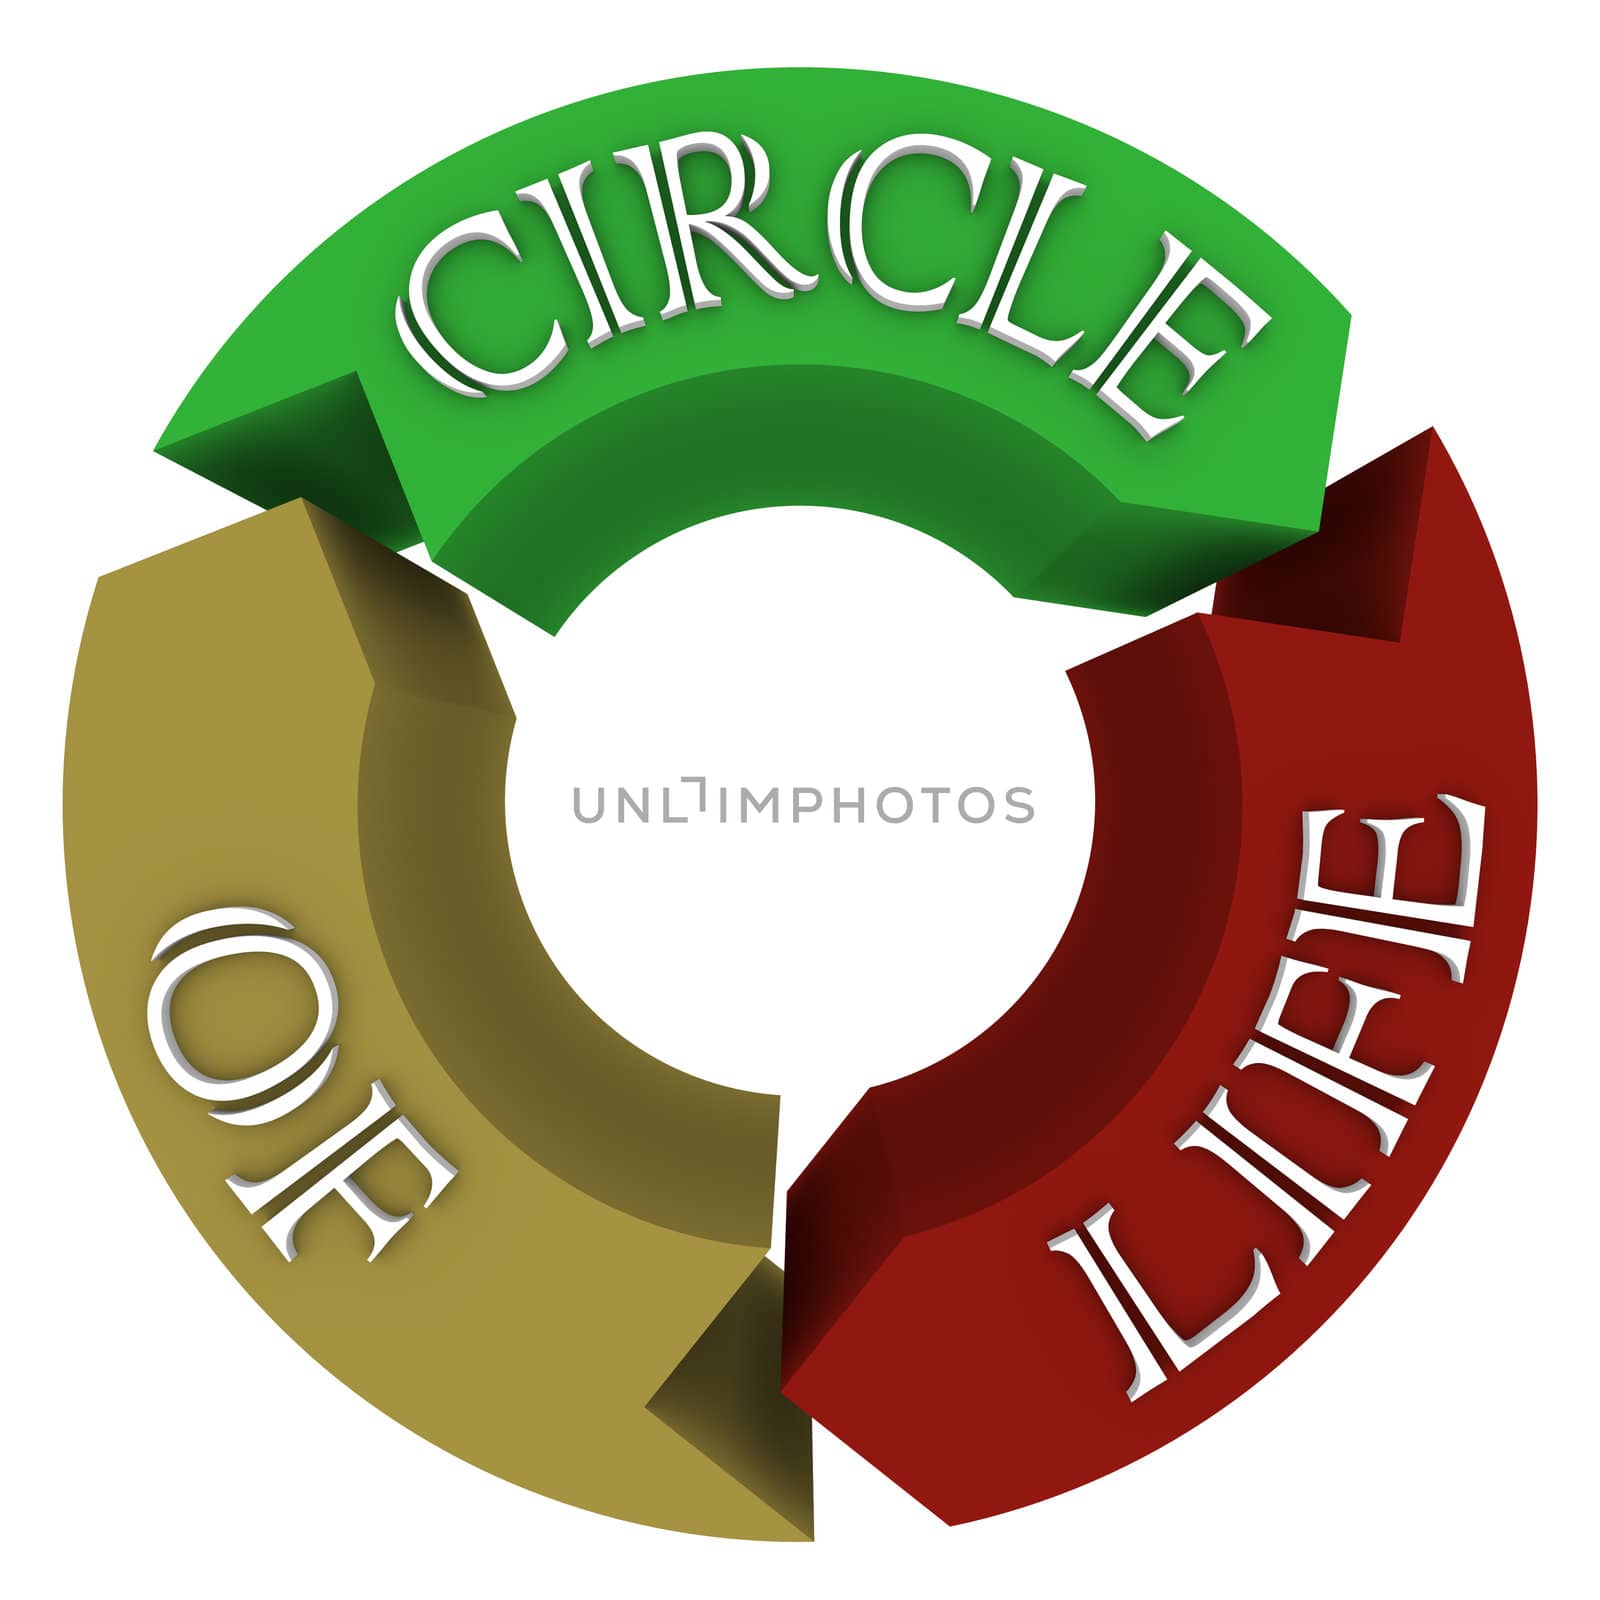 Circle of Life Arrows in Circular Cycle Showing Connections by iQoncept